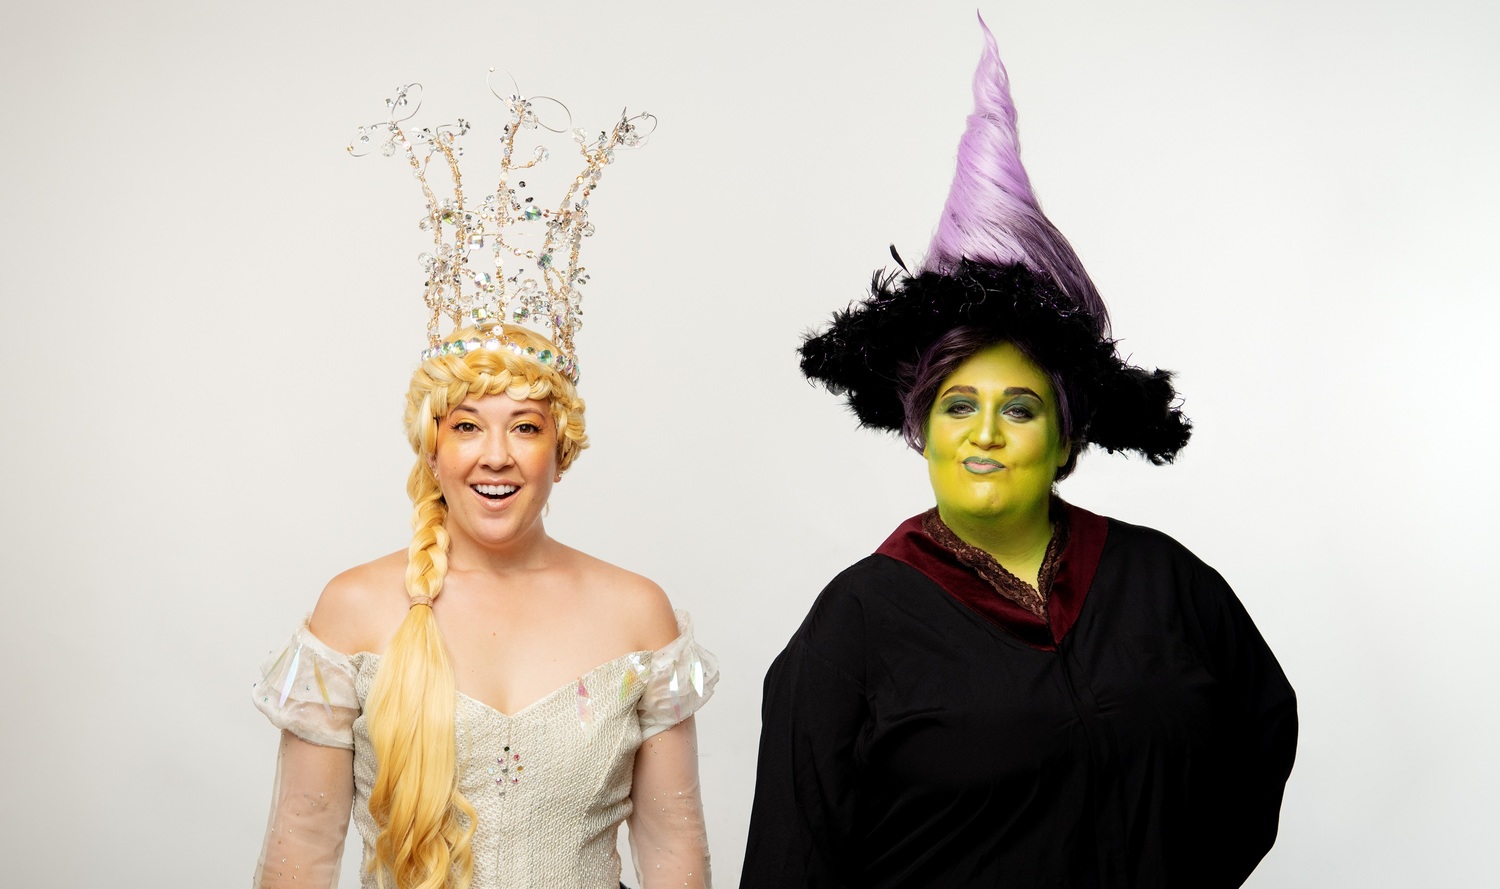 Glinda (MEGAN MCGRATH) and Wicked Witch of the West (BRIEL POMERANTZ) pose together in Berkeley Playhouse's production of The Wizard of Oz, directed by Lexie Lazear. Performing at the Julia Morgan Theater from November 9 to December 23 1